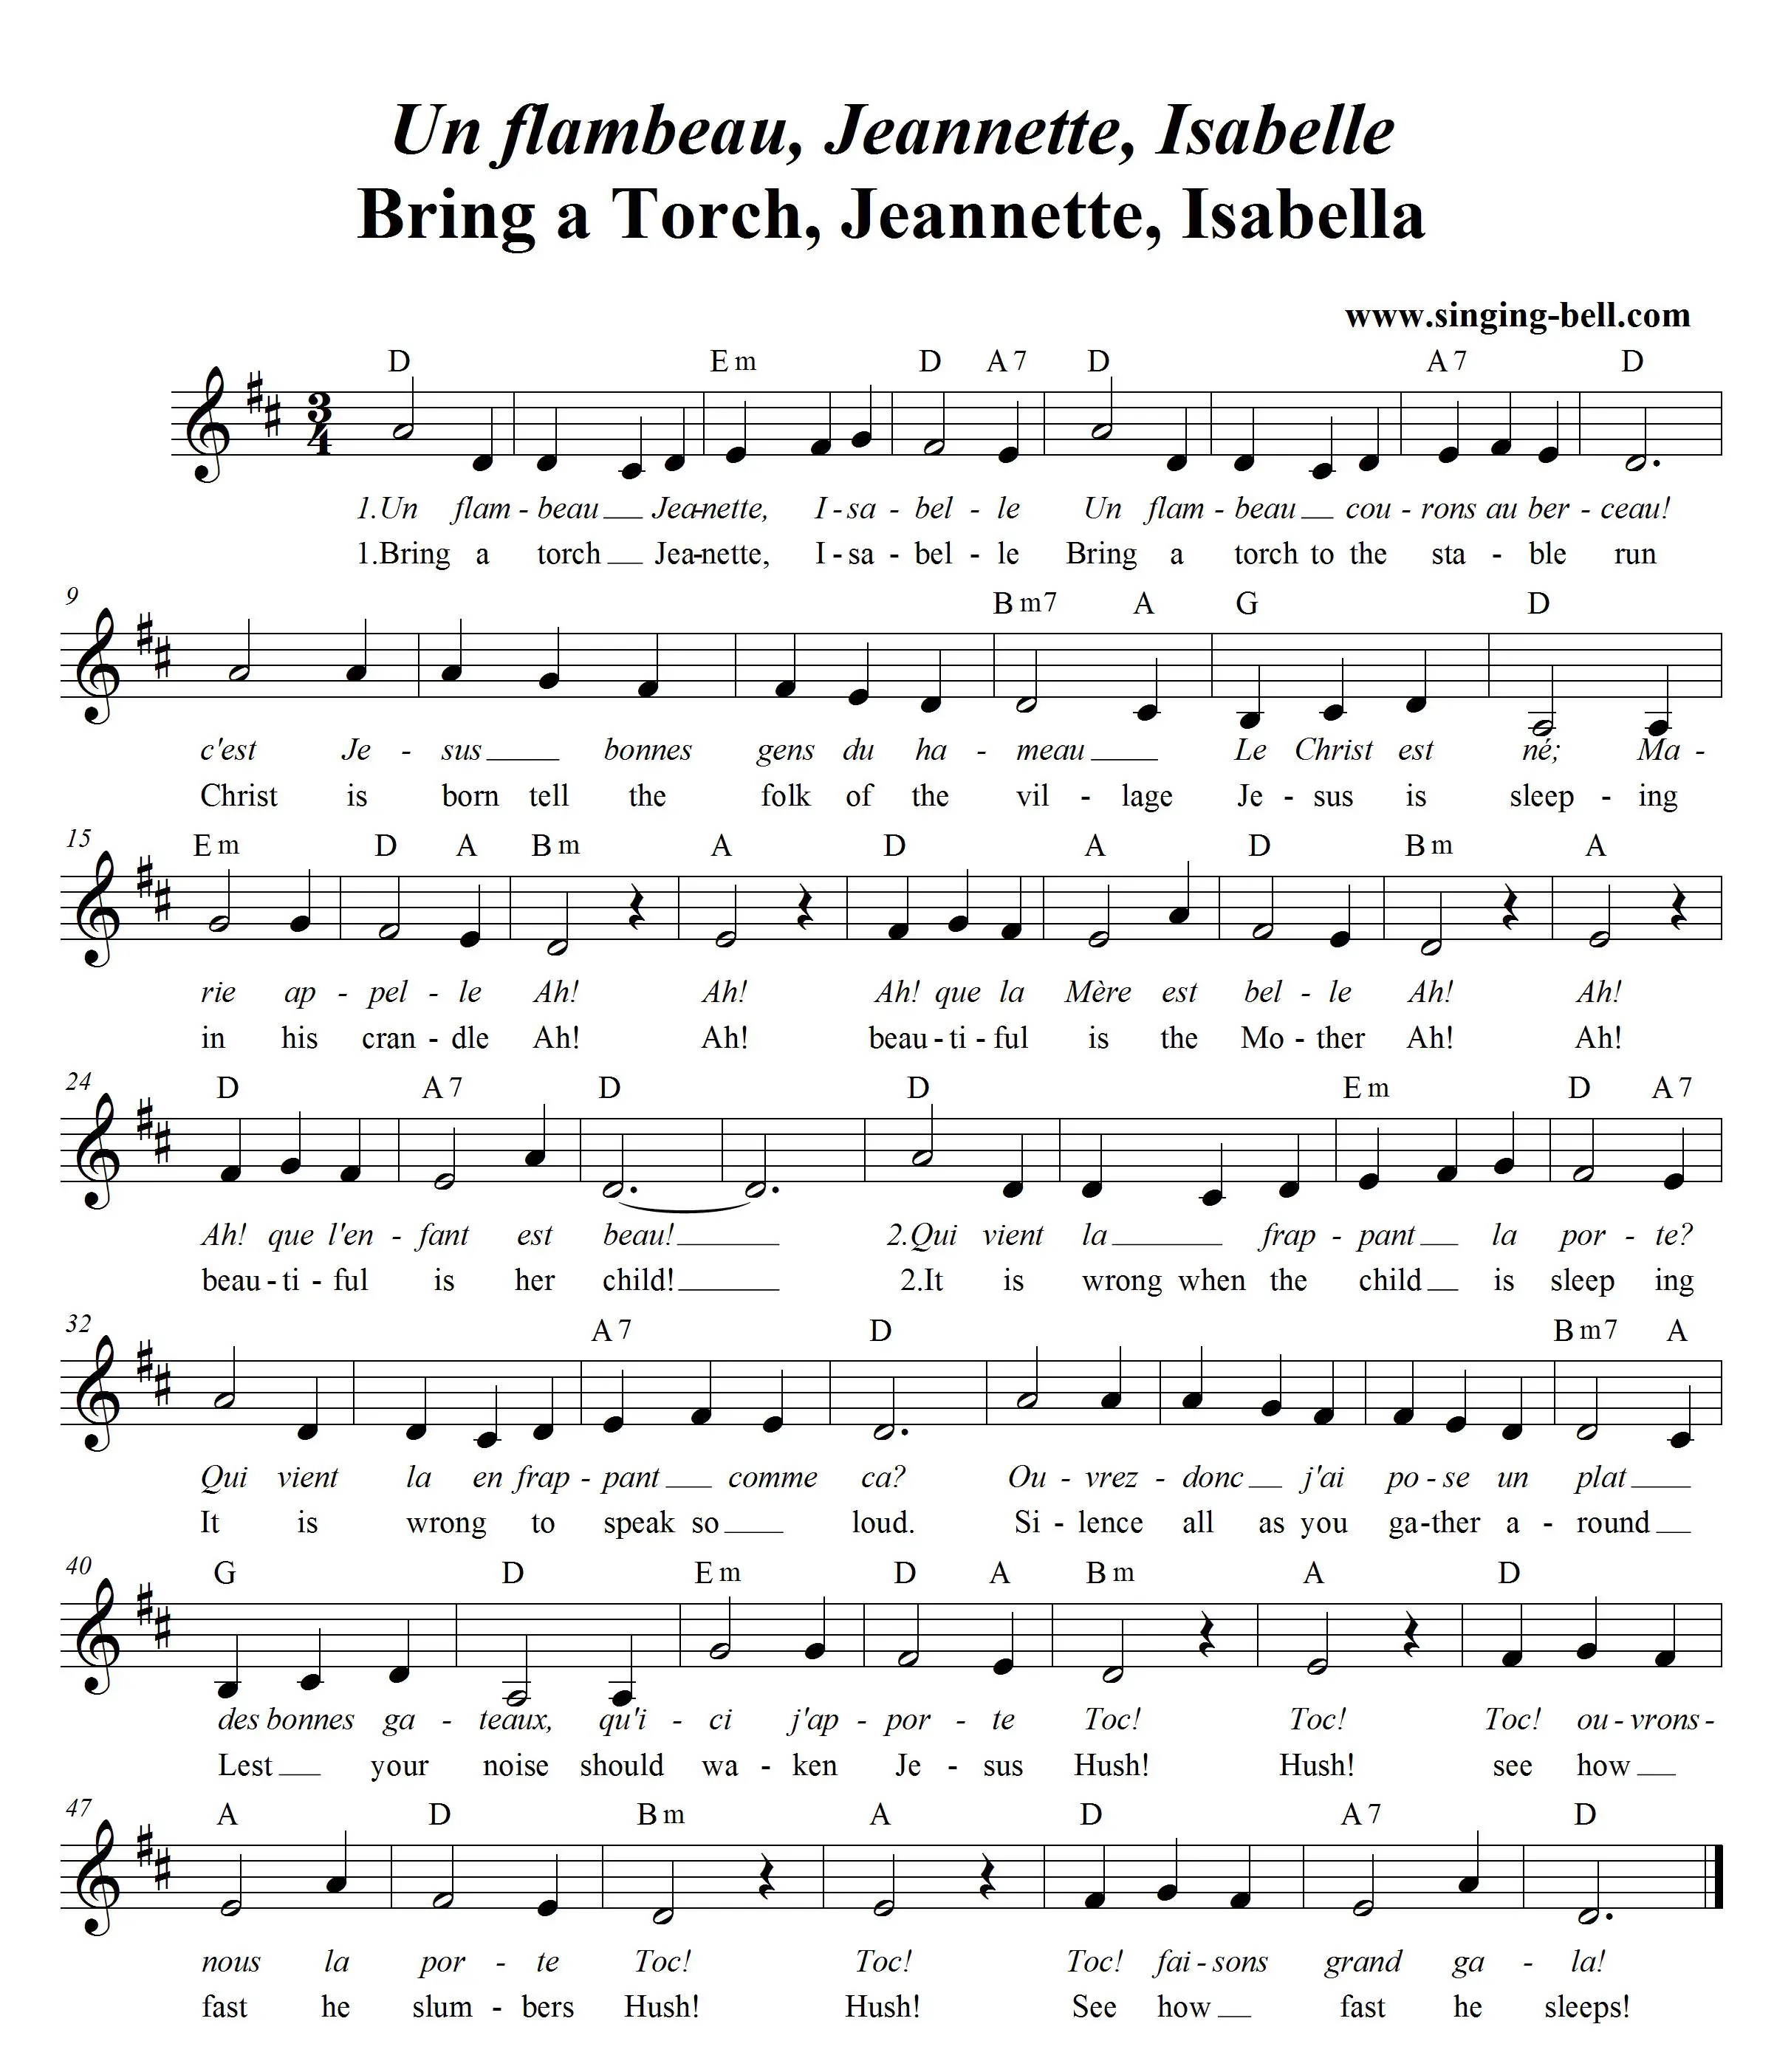 Bring a Torch, Jeanette, Isabelle | Free Sheet music download